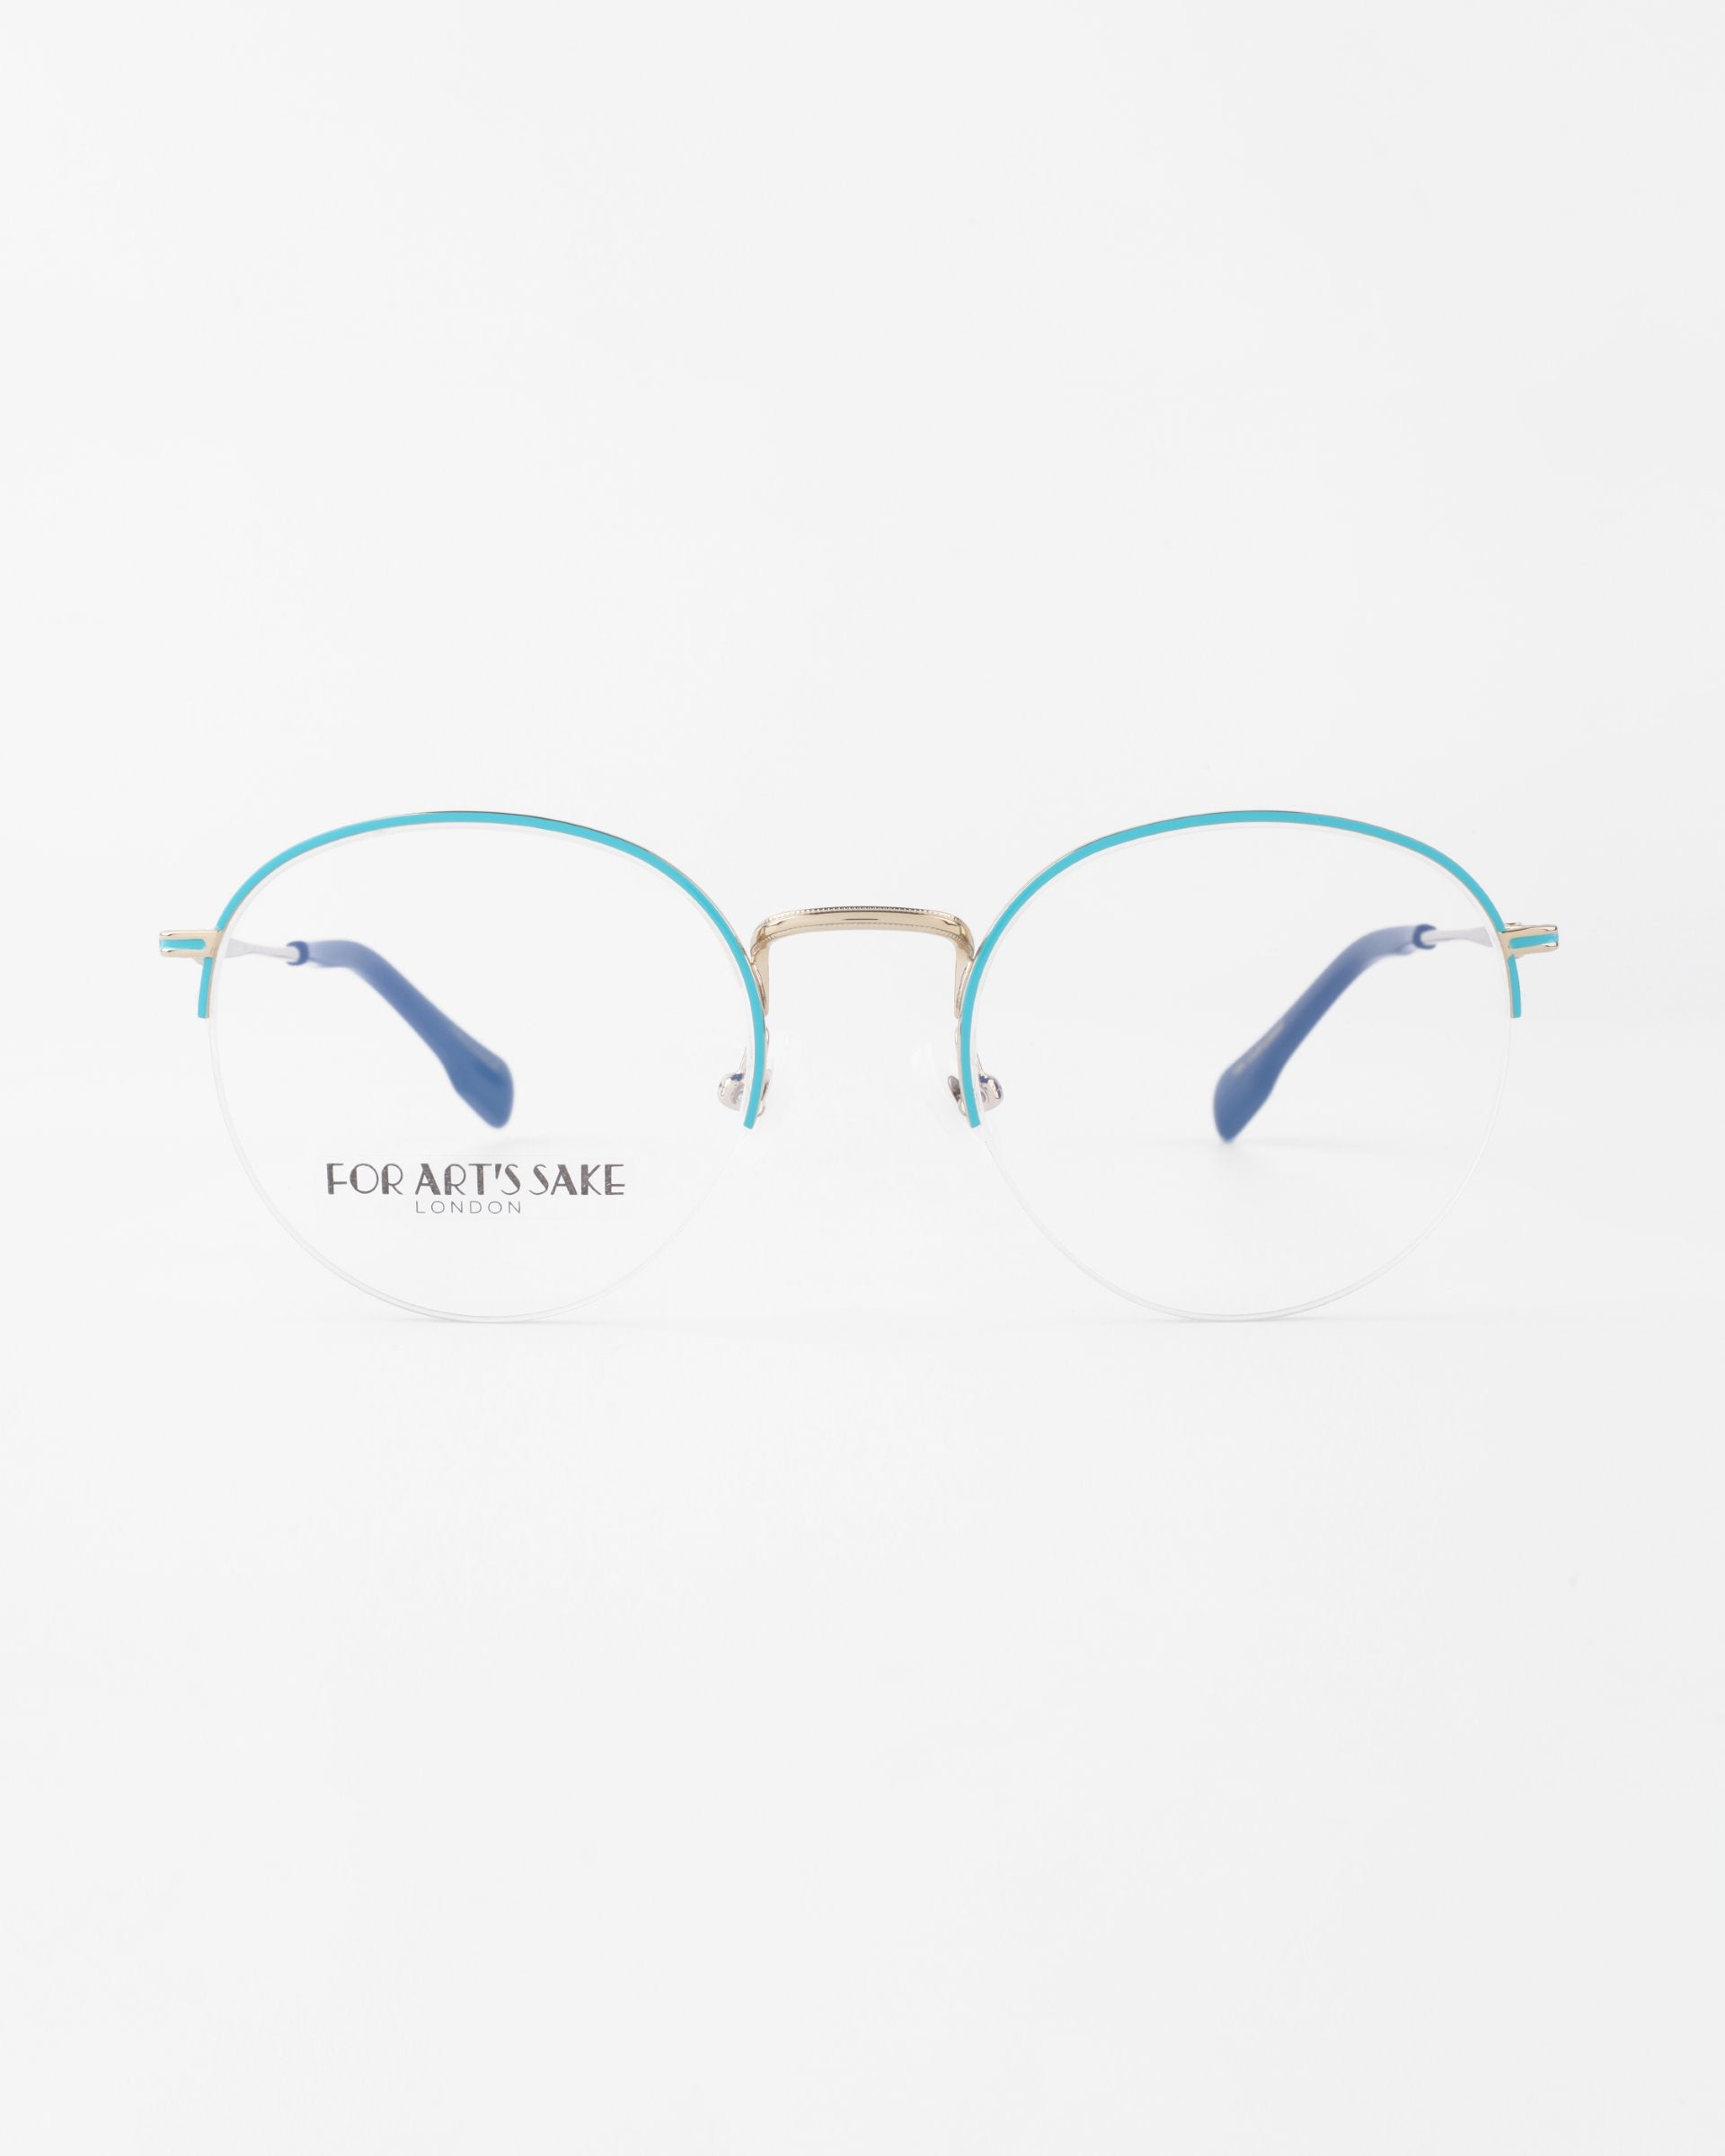 Image of a pair of eyeglasses with a metal frame. The top of the frames is turquoise, and the temples are also turquoise with blue tips. &quot;FOR ART&#39;S SAKE LONDON&quot; is printed on the left lens. These stylish Ivy glasses by For Art&#39;s Sake®, designed for both fashion and function, include prescription lenses with a blue light filter. The background is white.